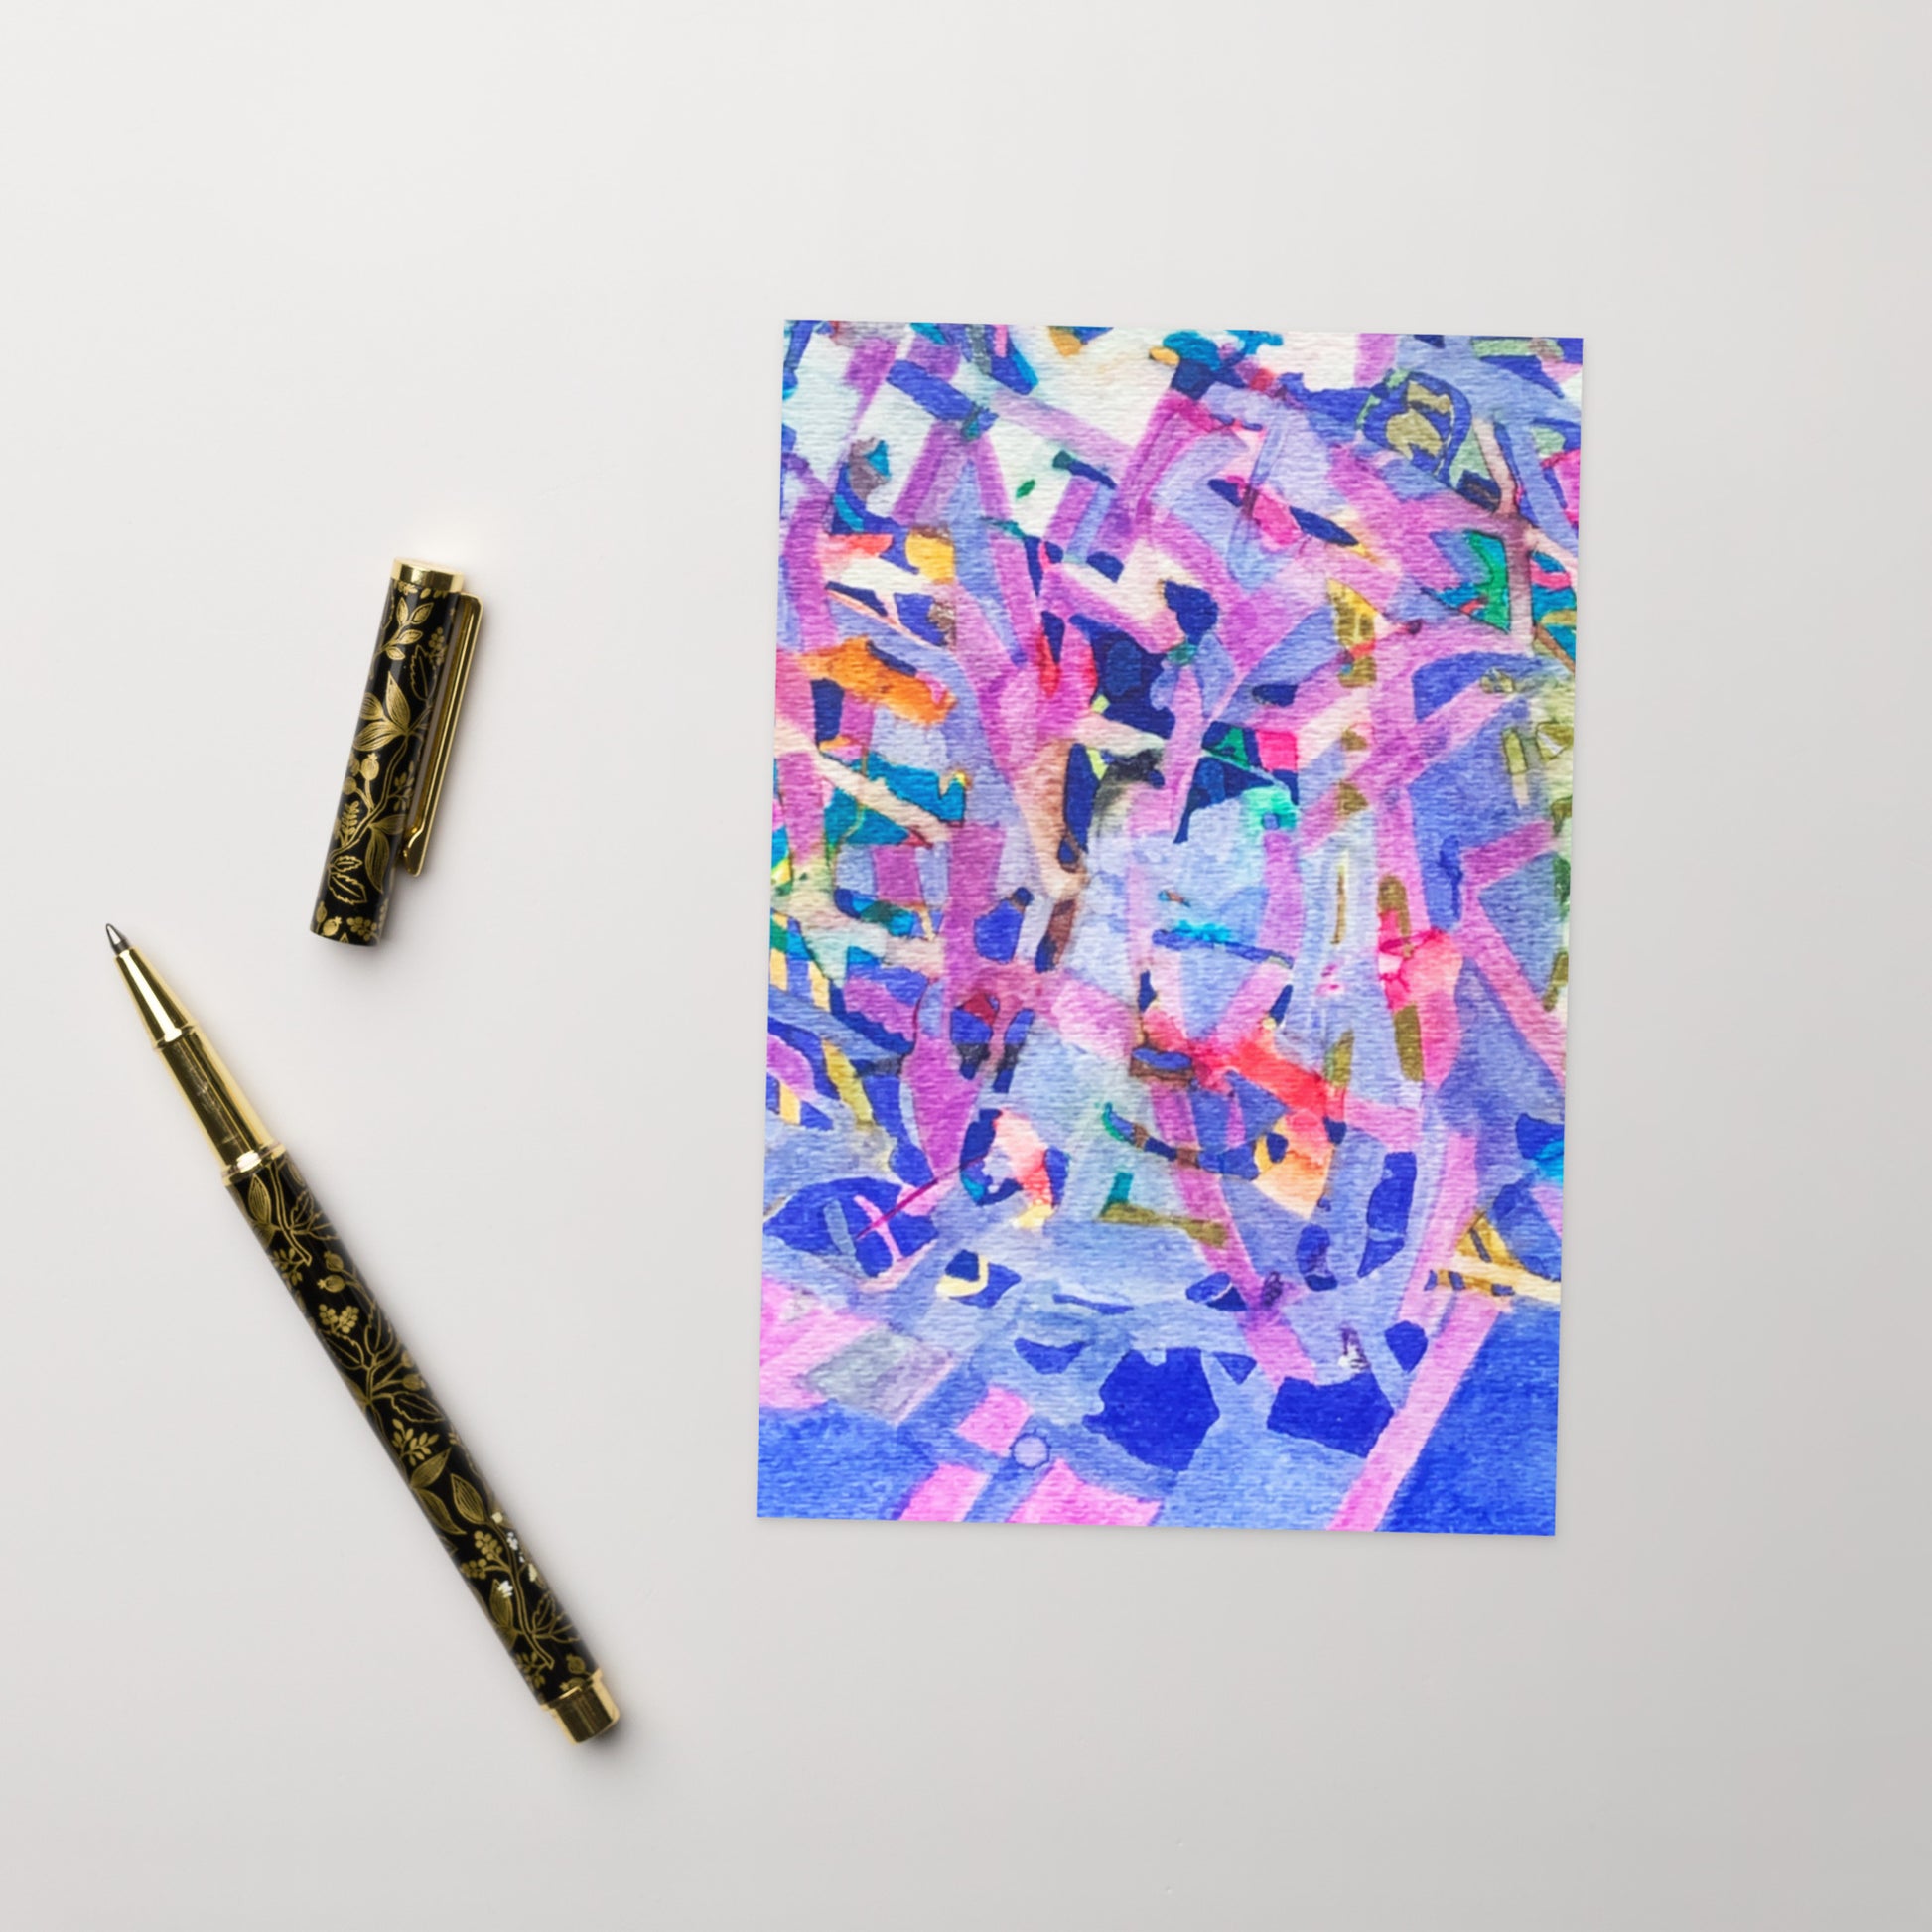 Behind the Scenes Abstract Greeting card - Art Love Decor